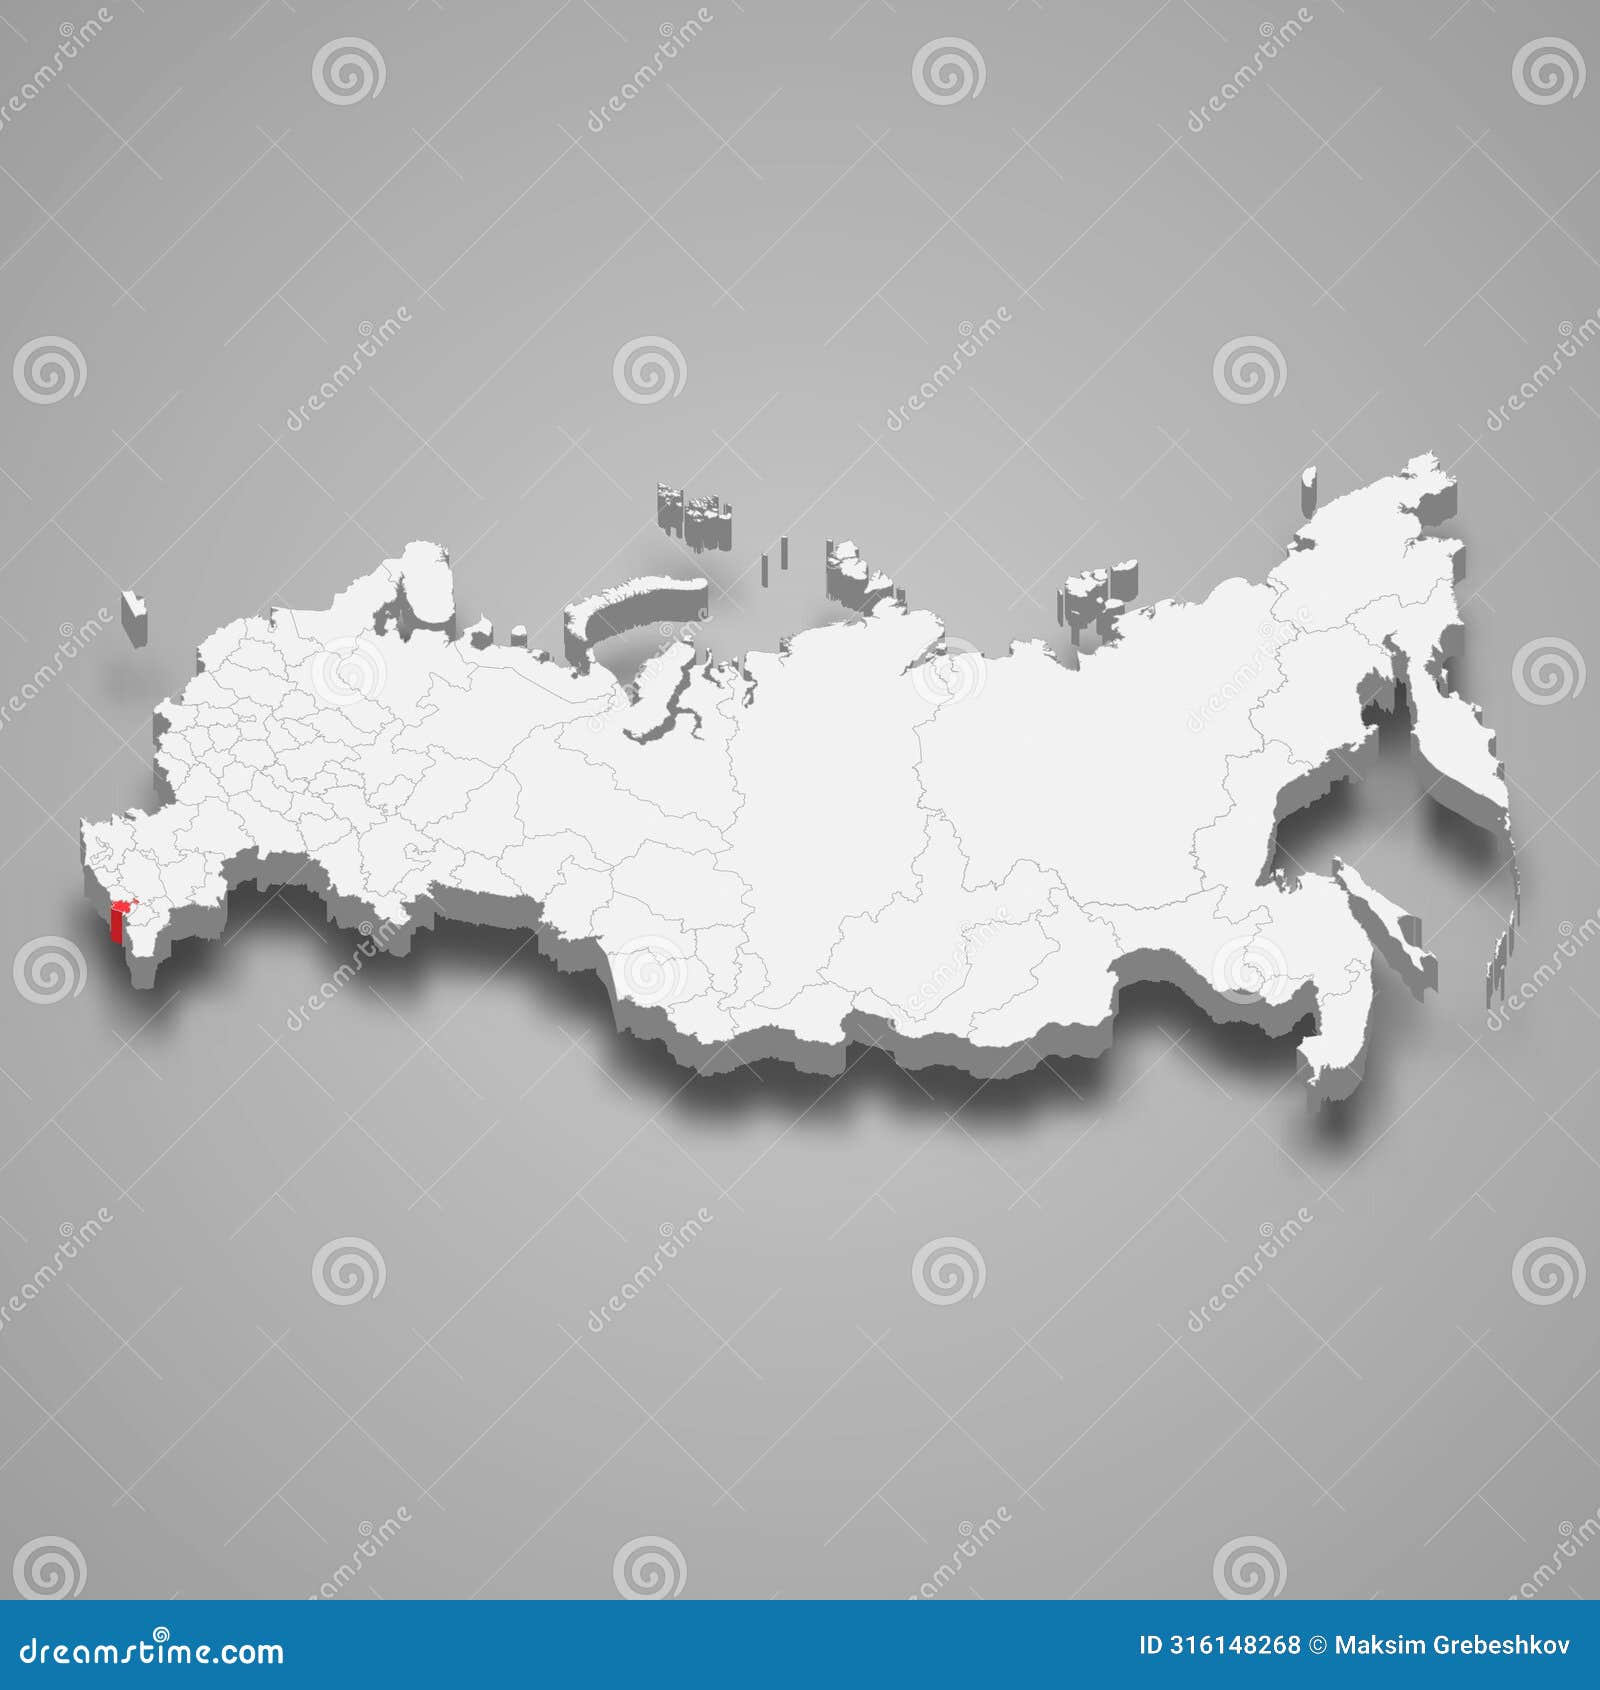 north ossetia-alania region location within russia 3d map